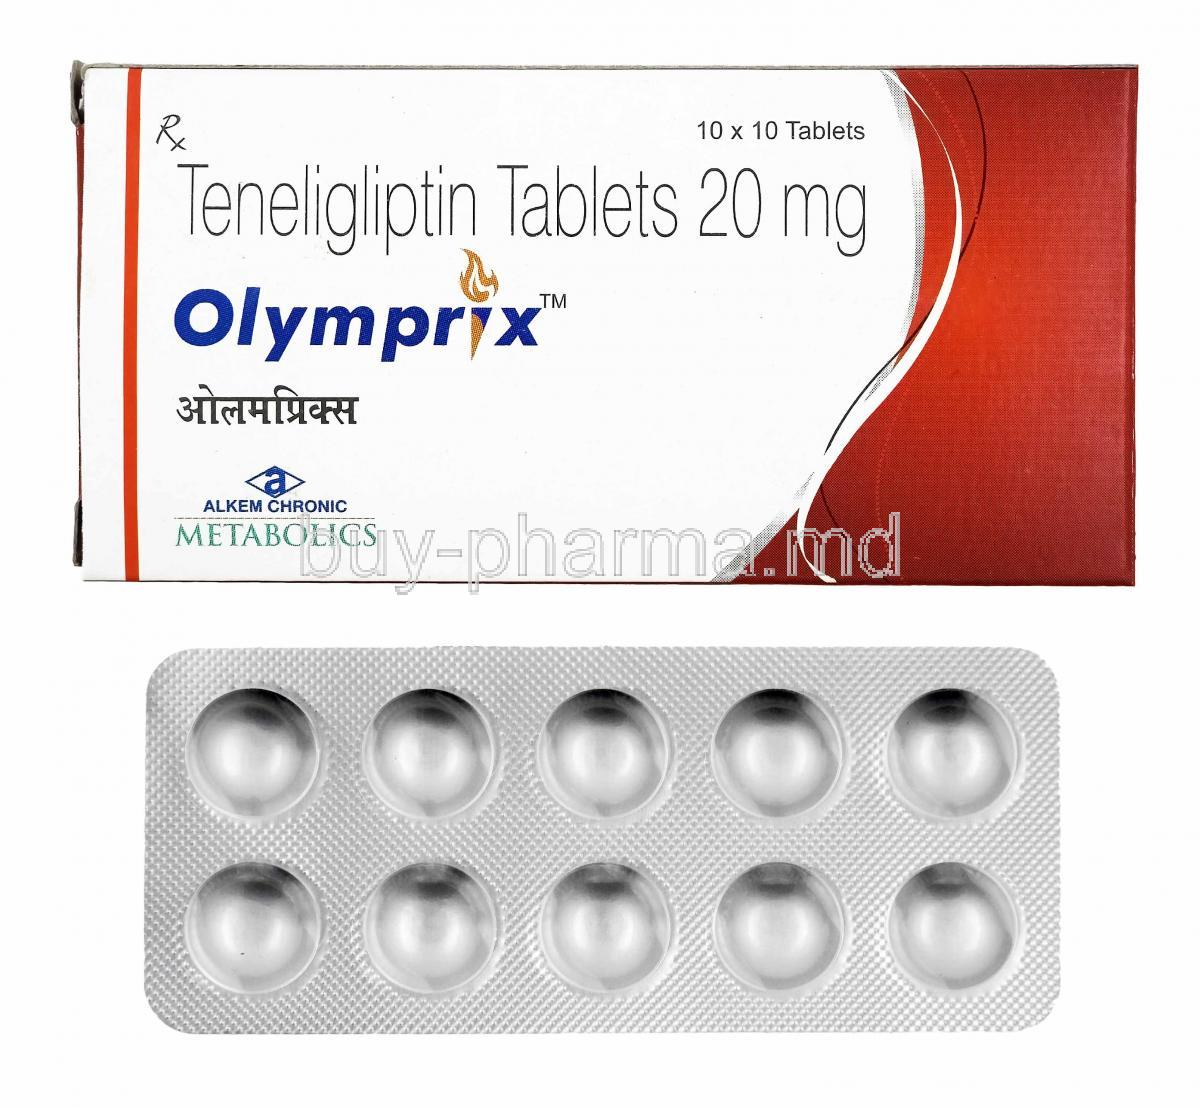 Olymprix, Teneligliptin box and tablets